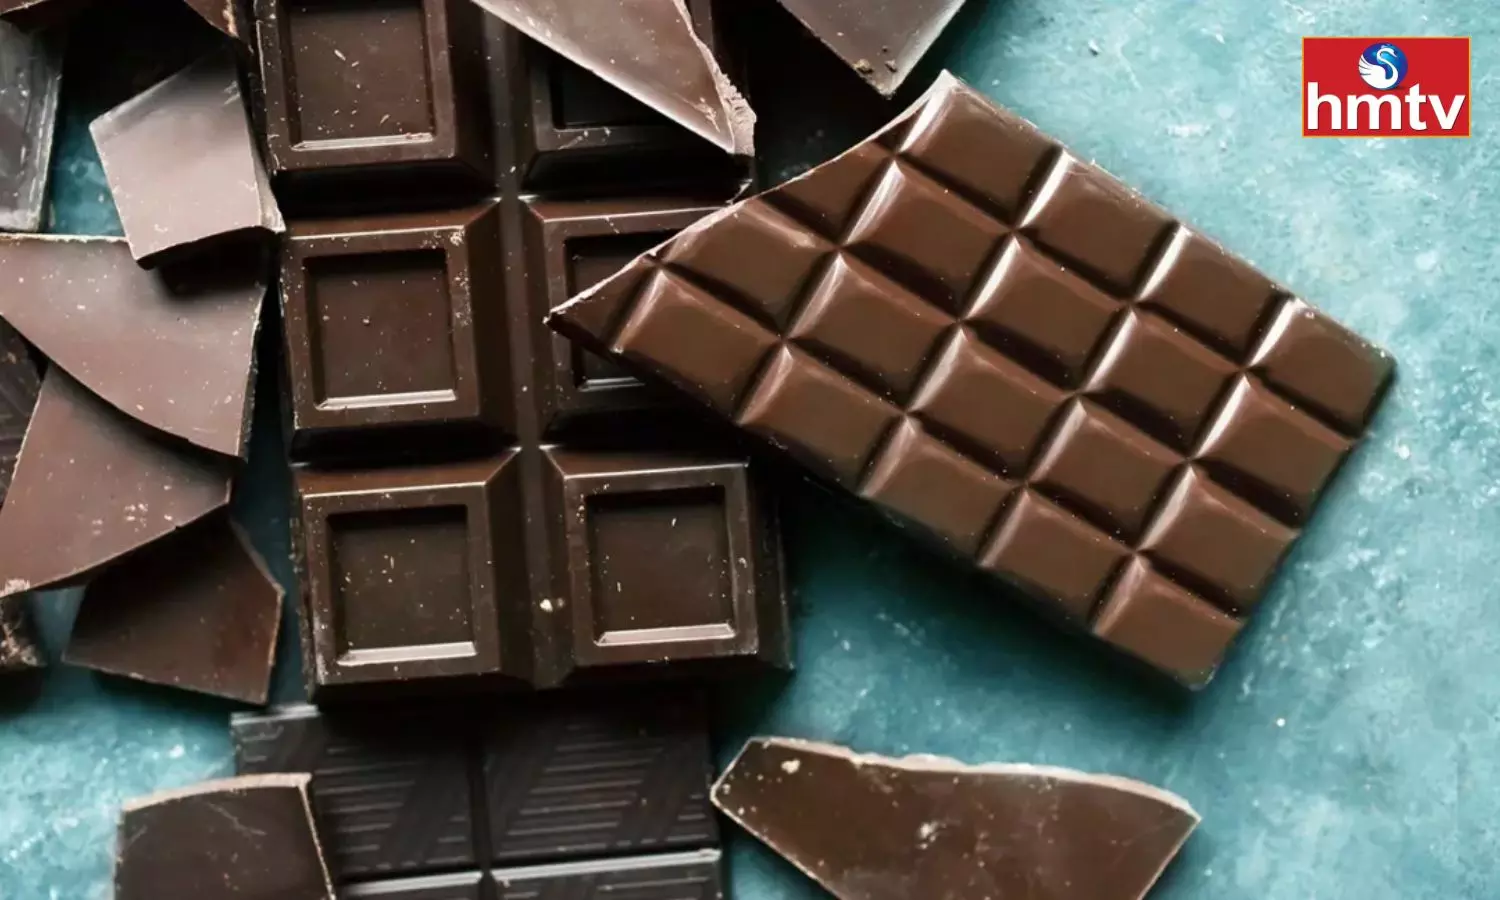 There are Amazing Benefits of Eating Dark Chocolate Know That